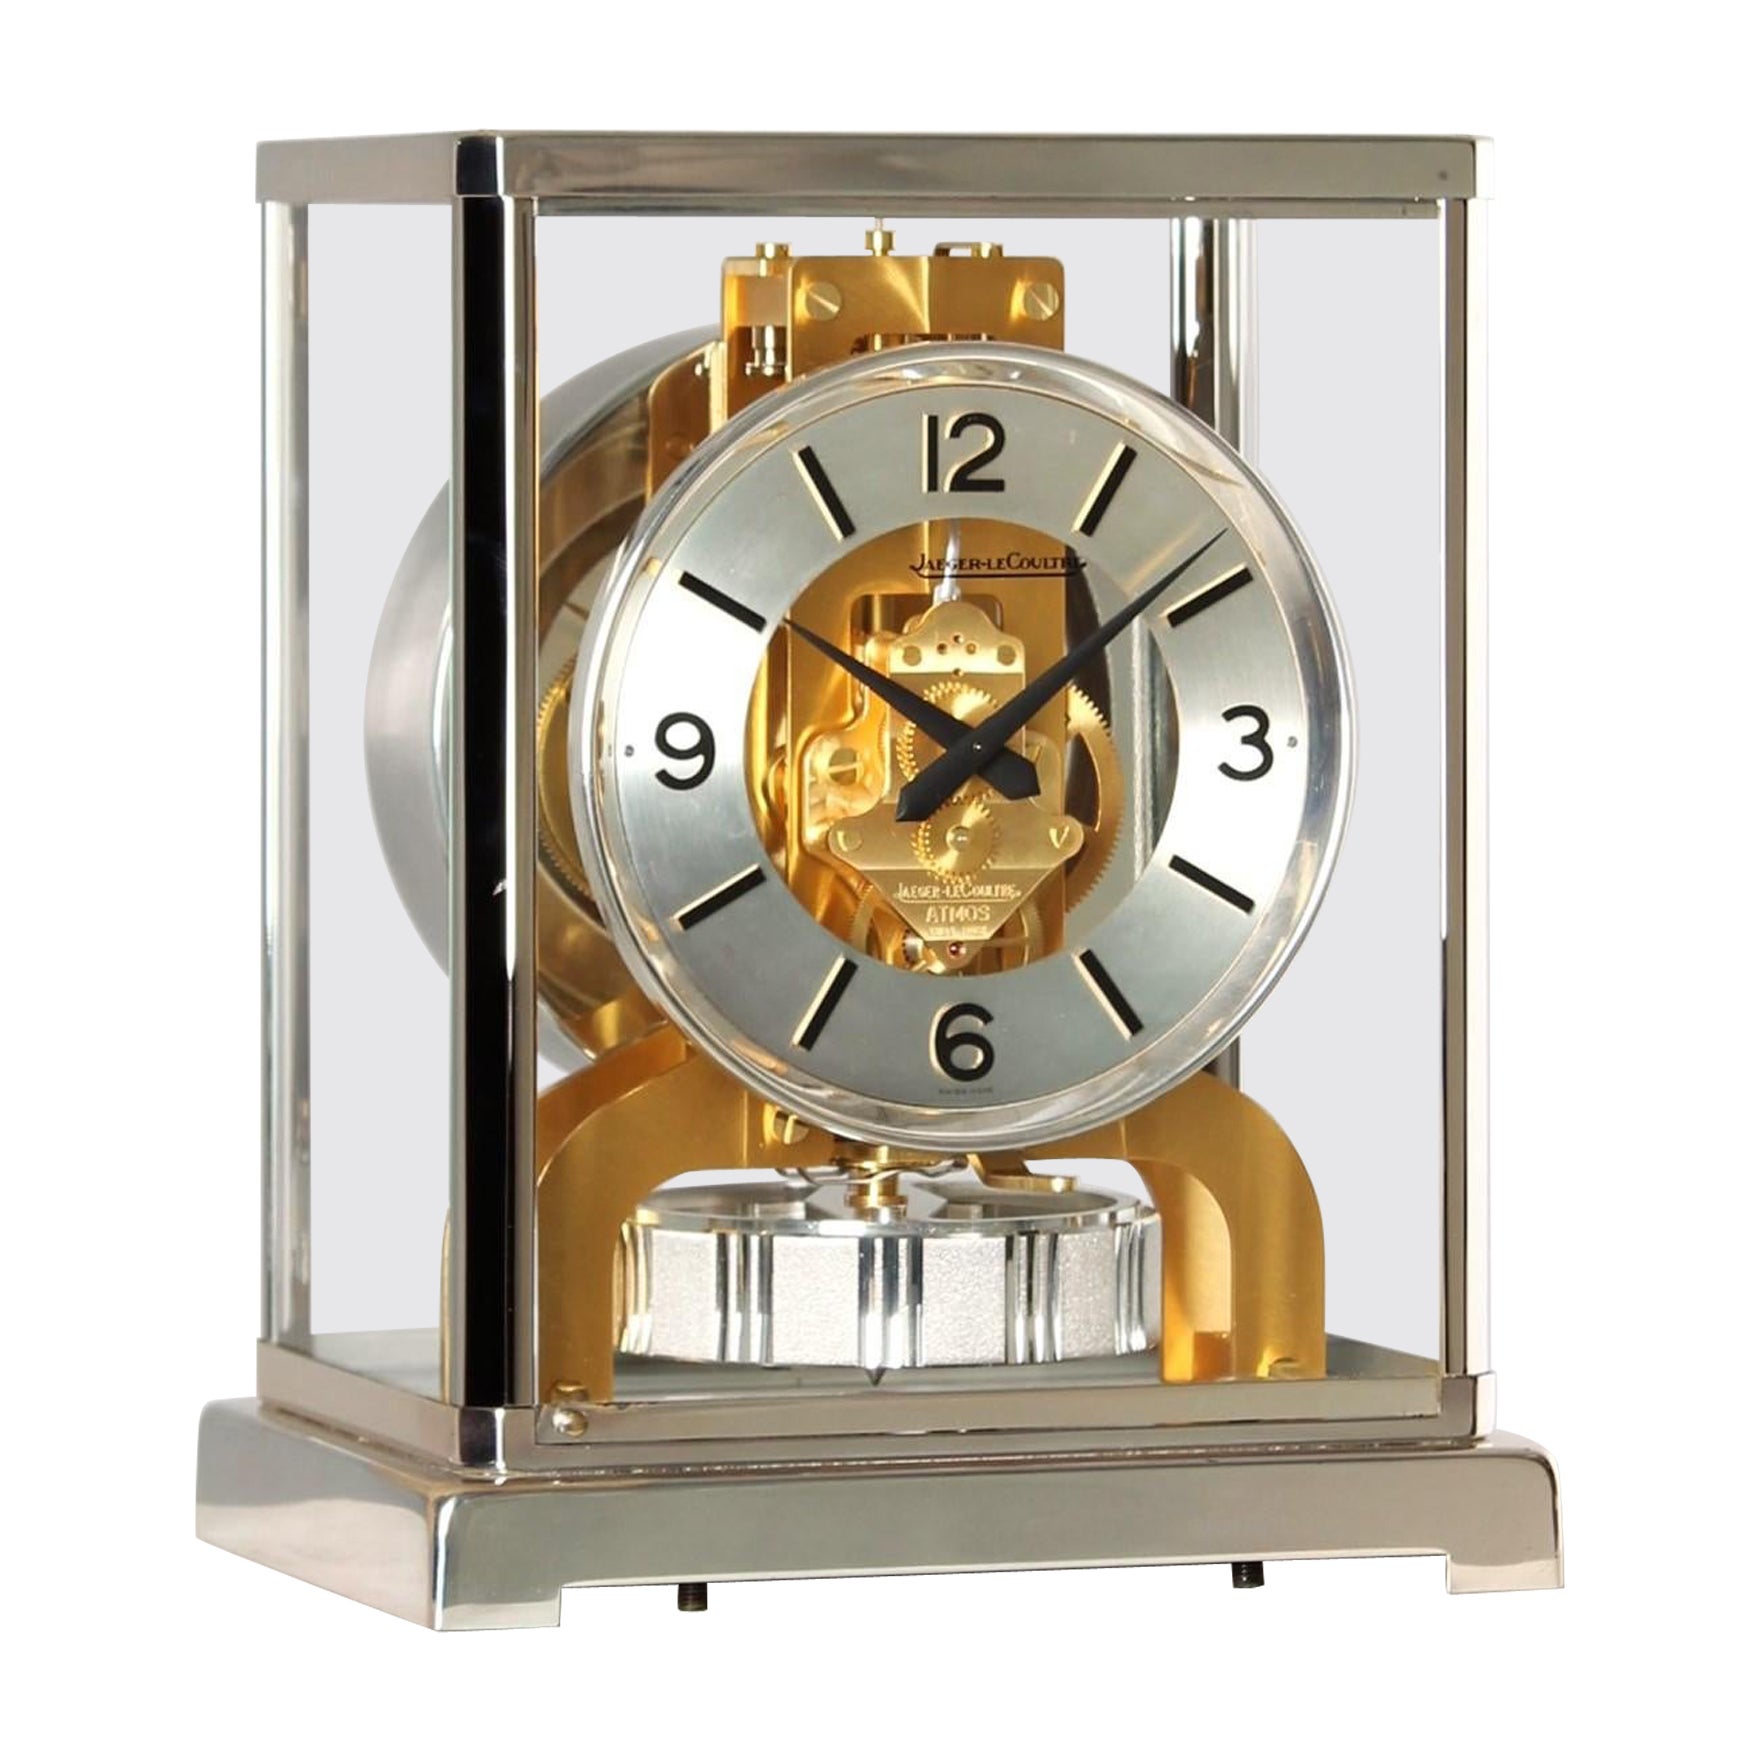 How does a Jaeger-LeCoultre Atmos clock work?